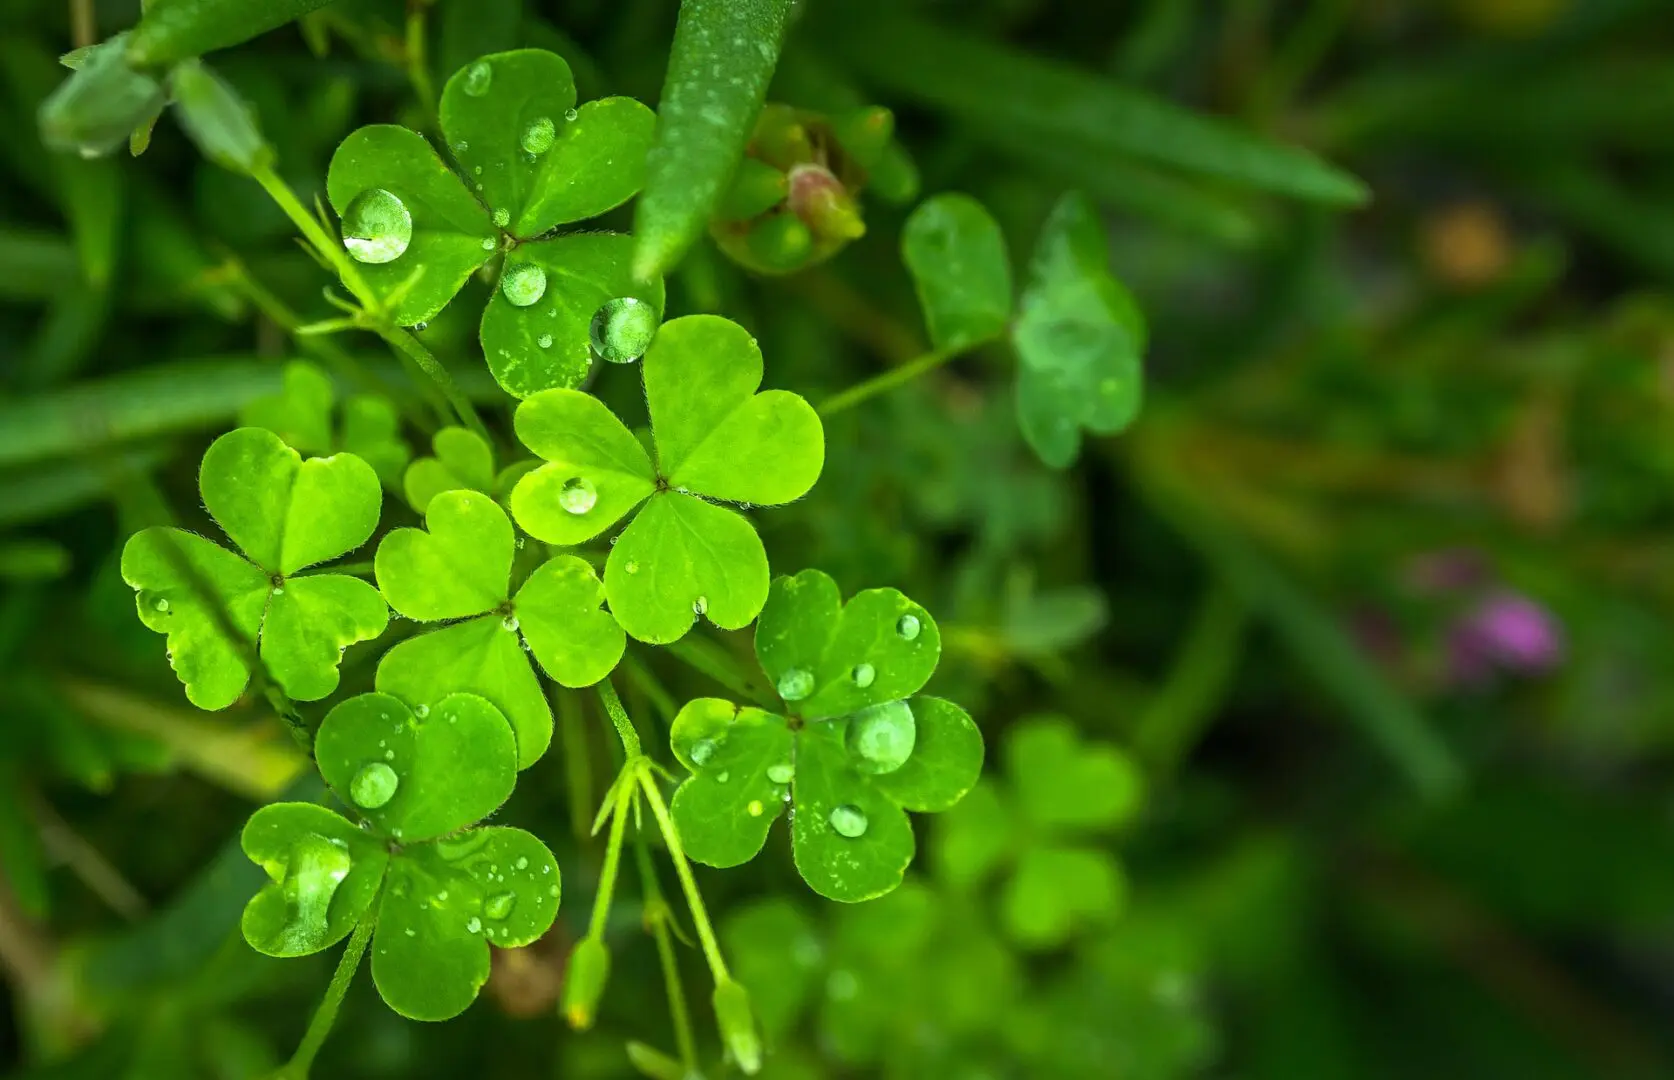 four leaf clover Plant Care: Water, Light, Nutrients